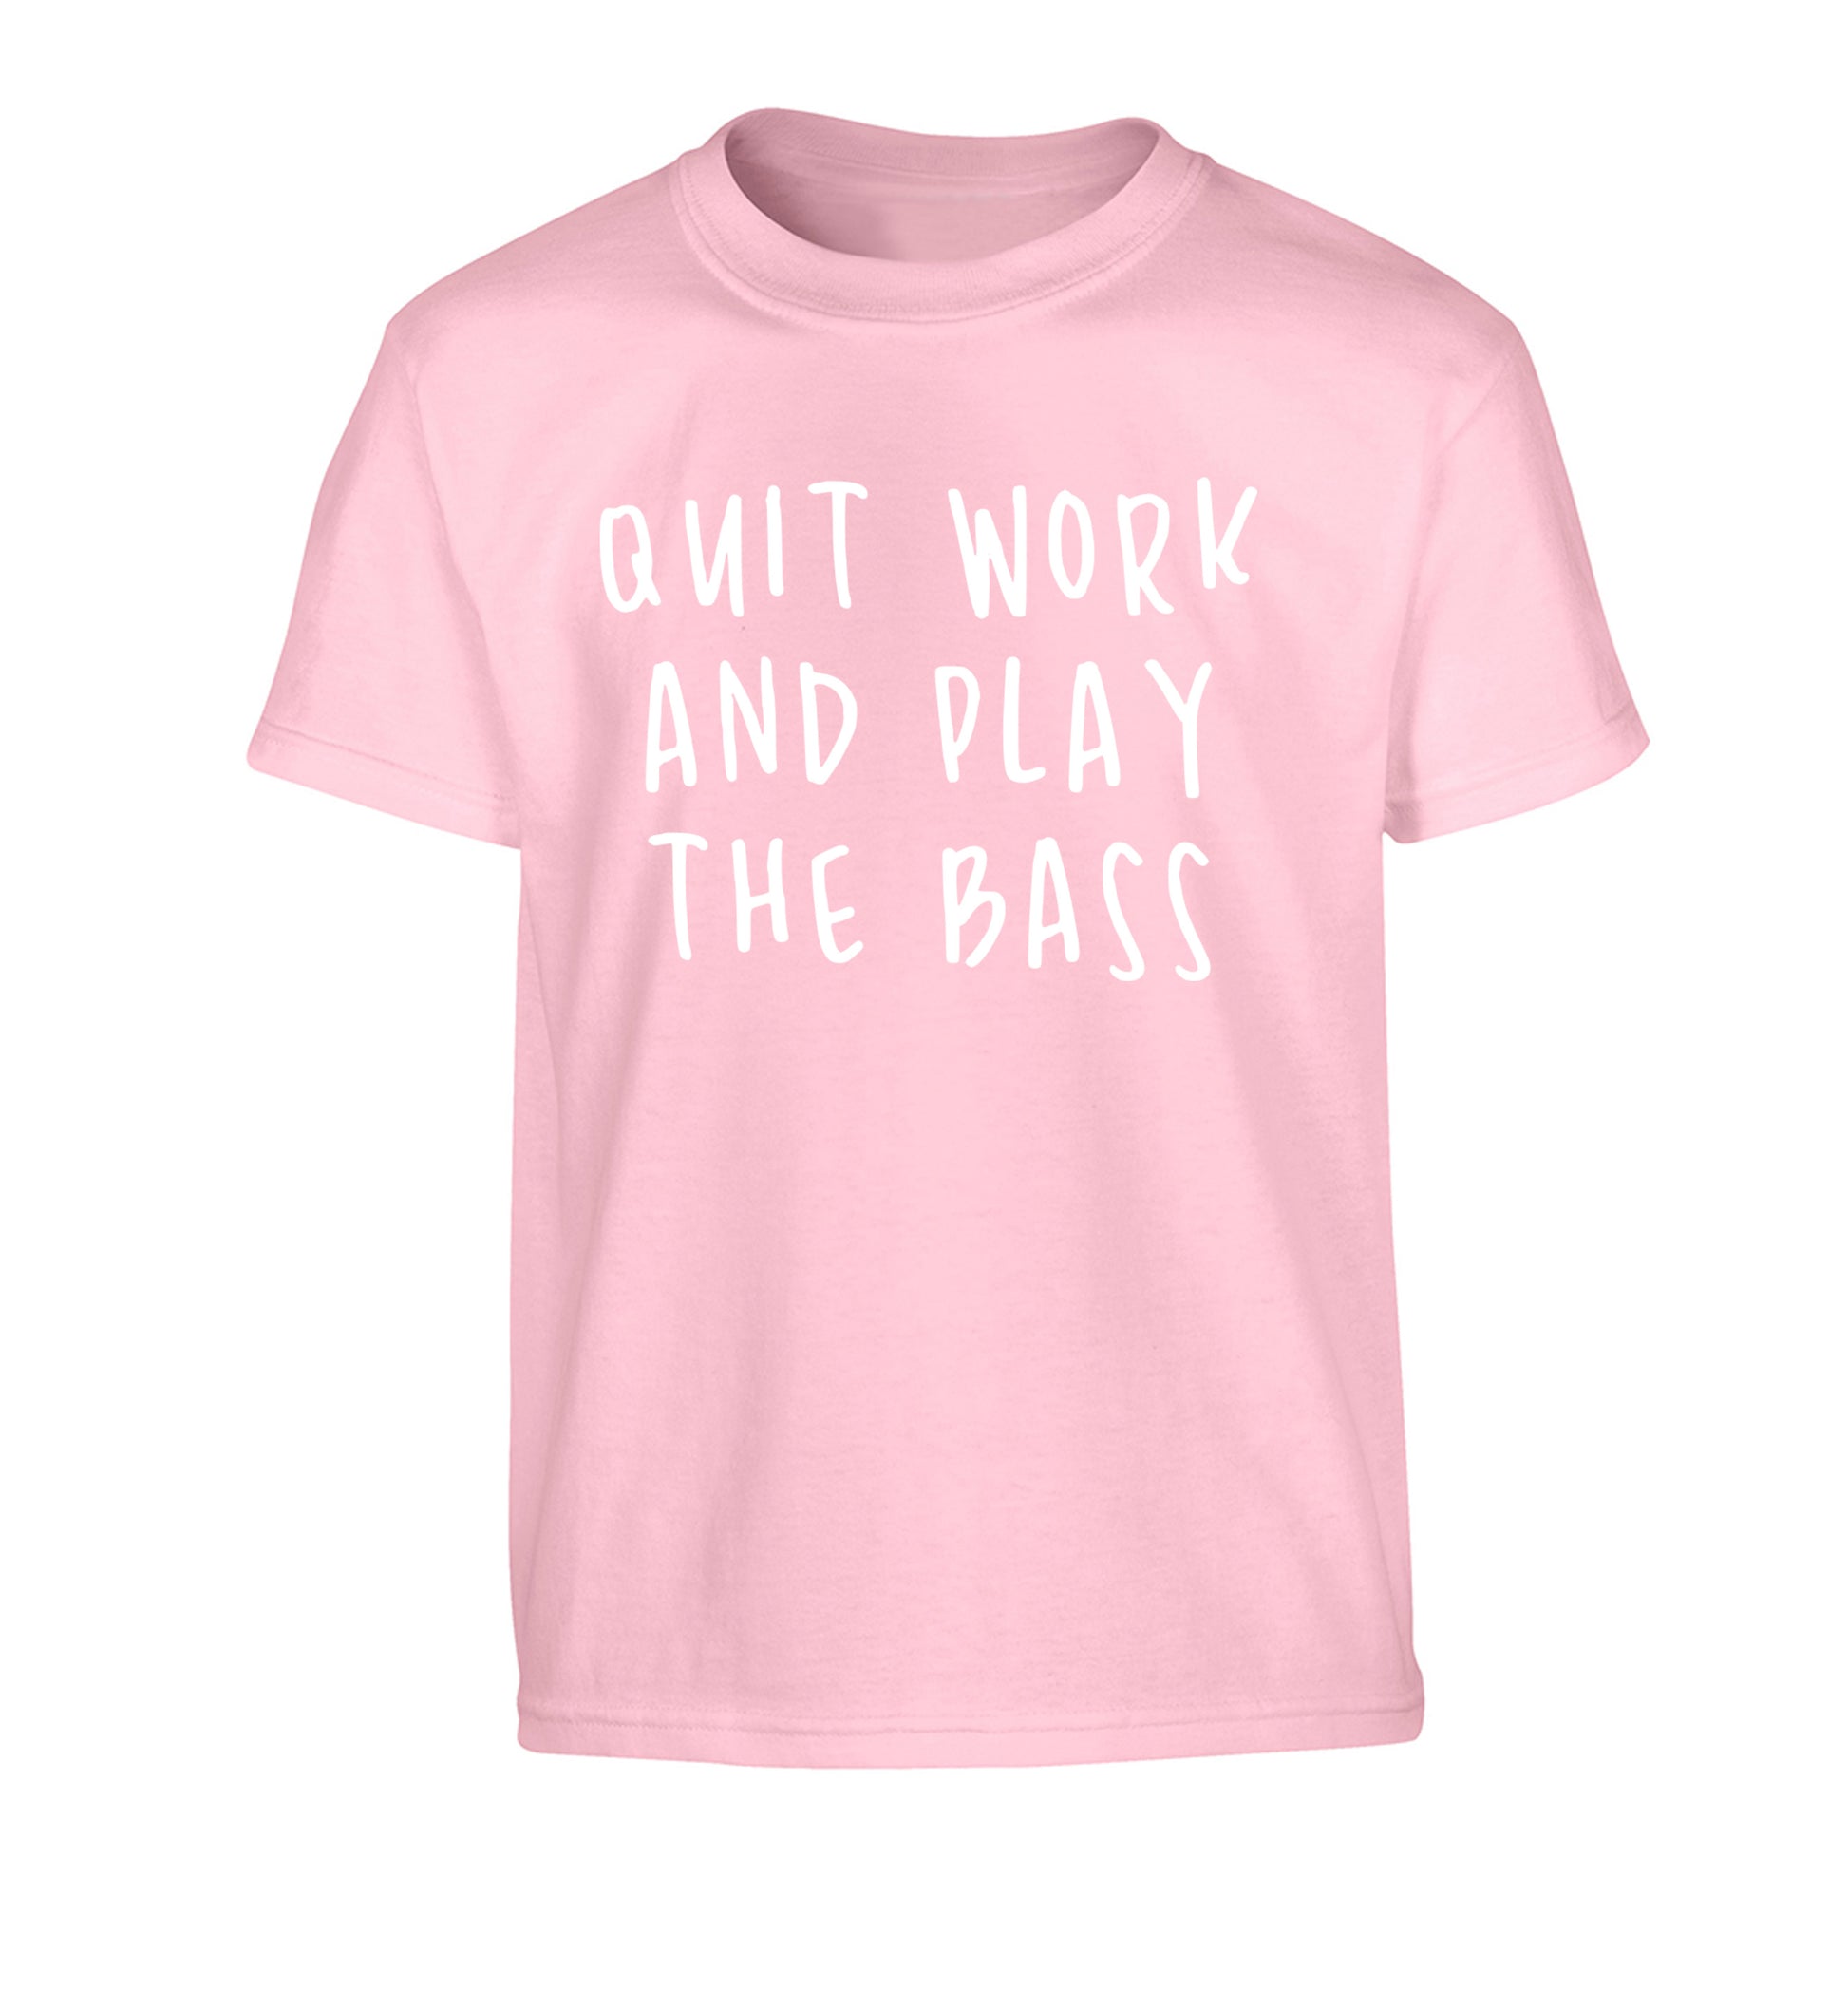 Quit work and play the bass Children's light pink Tshirt 12-14 Years